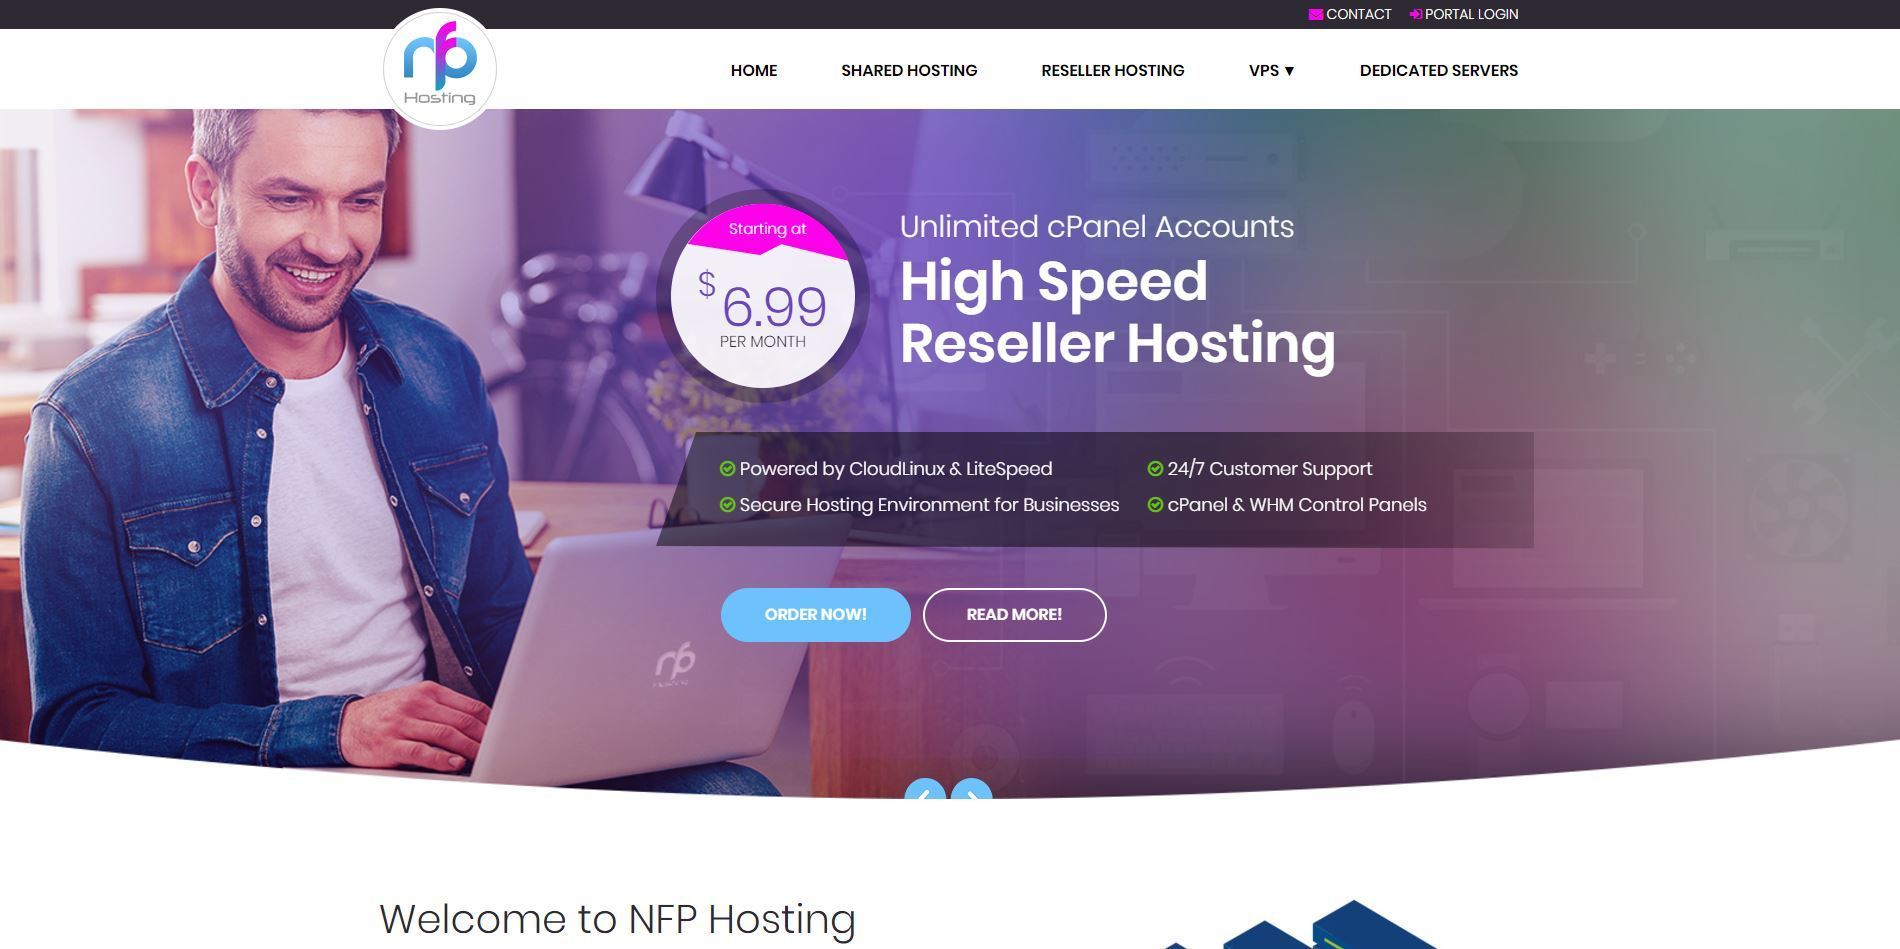 [NEW PROVIDER] NFP Hosting Exclusive VPS Offer - 1GB starting at $12/yr.